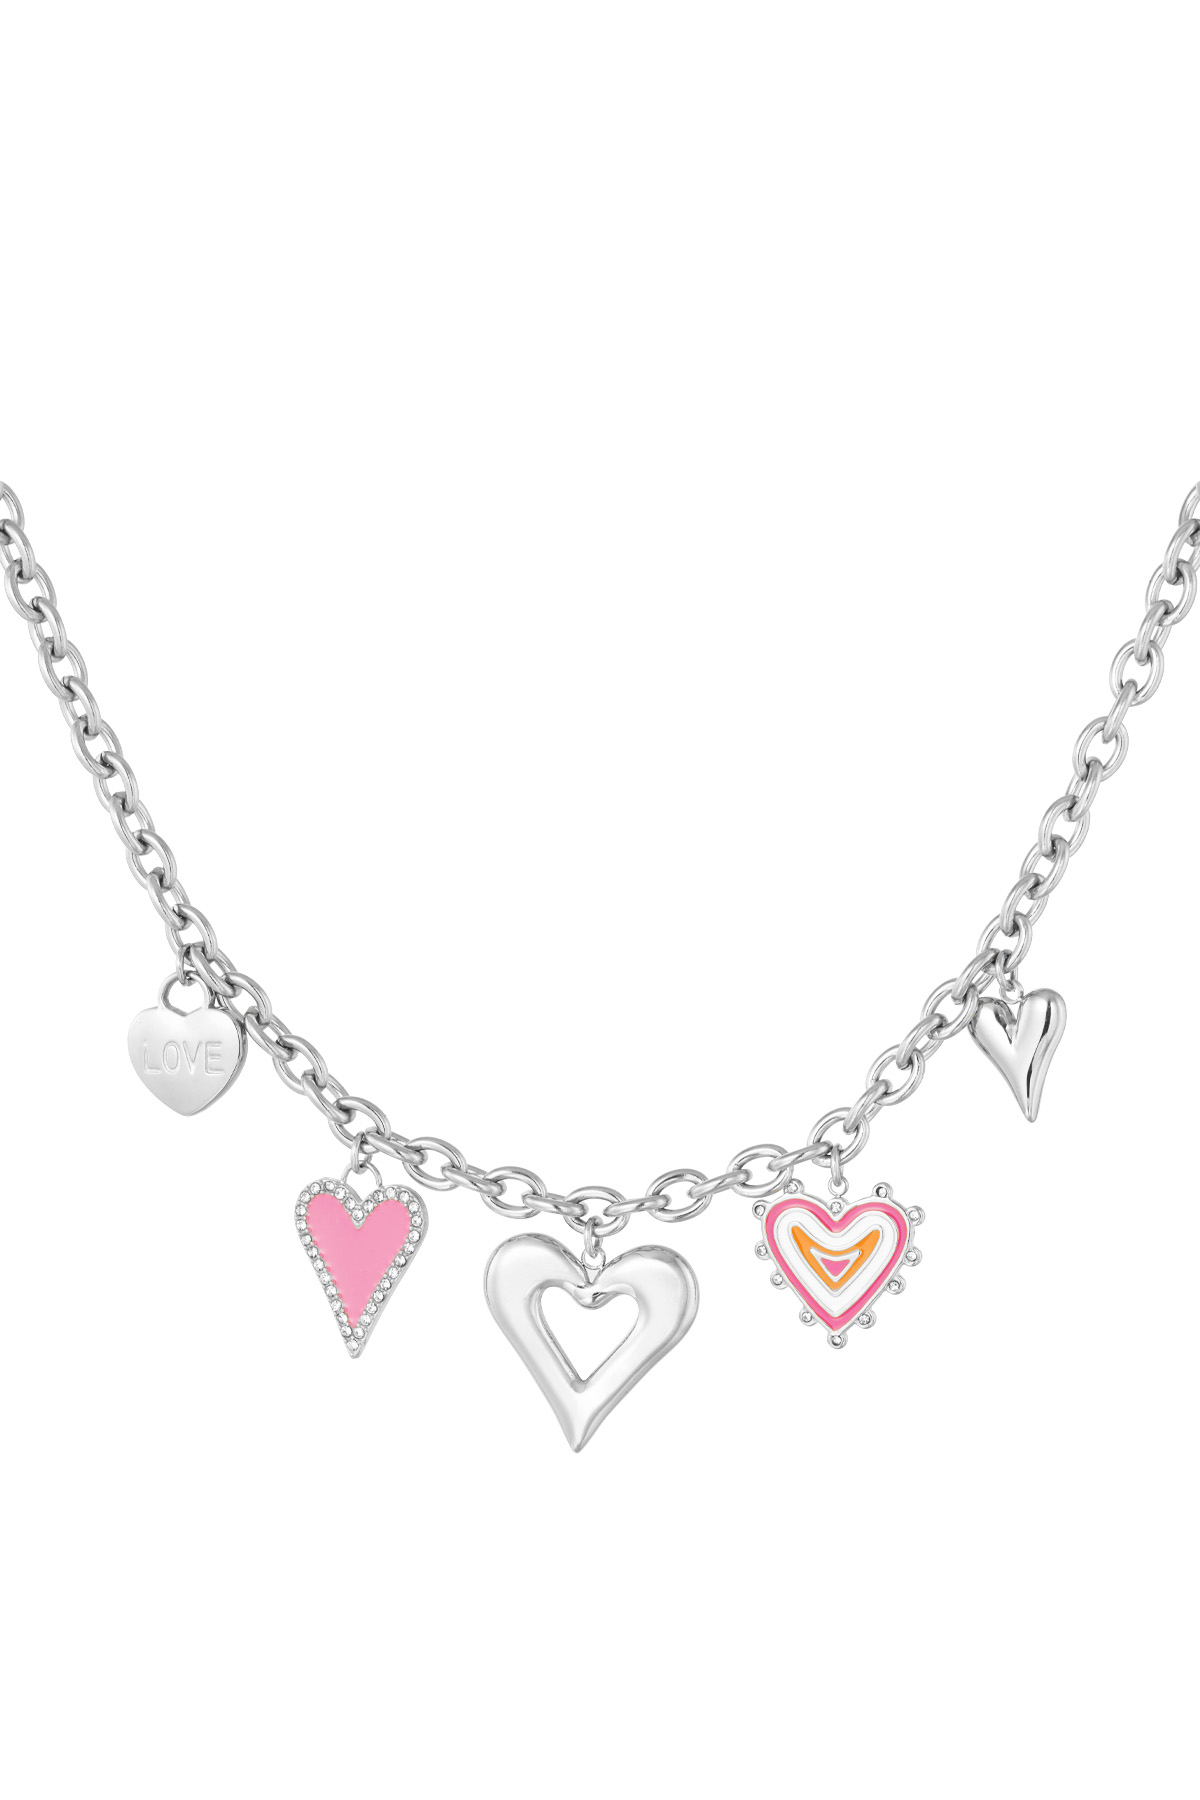 Charm necklace love always wins - silver